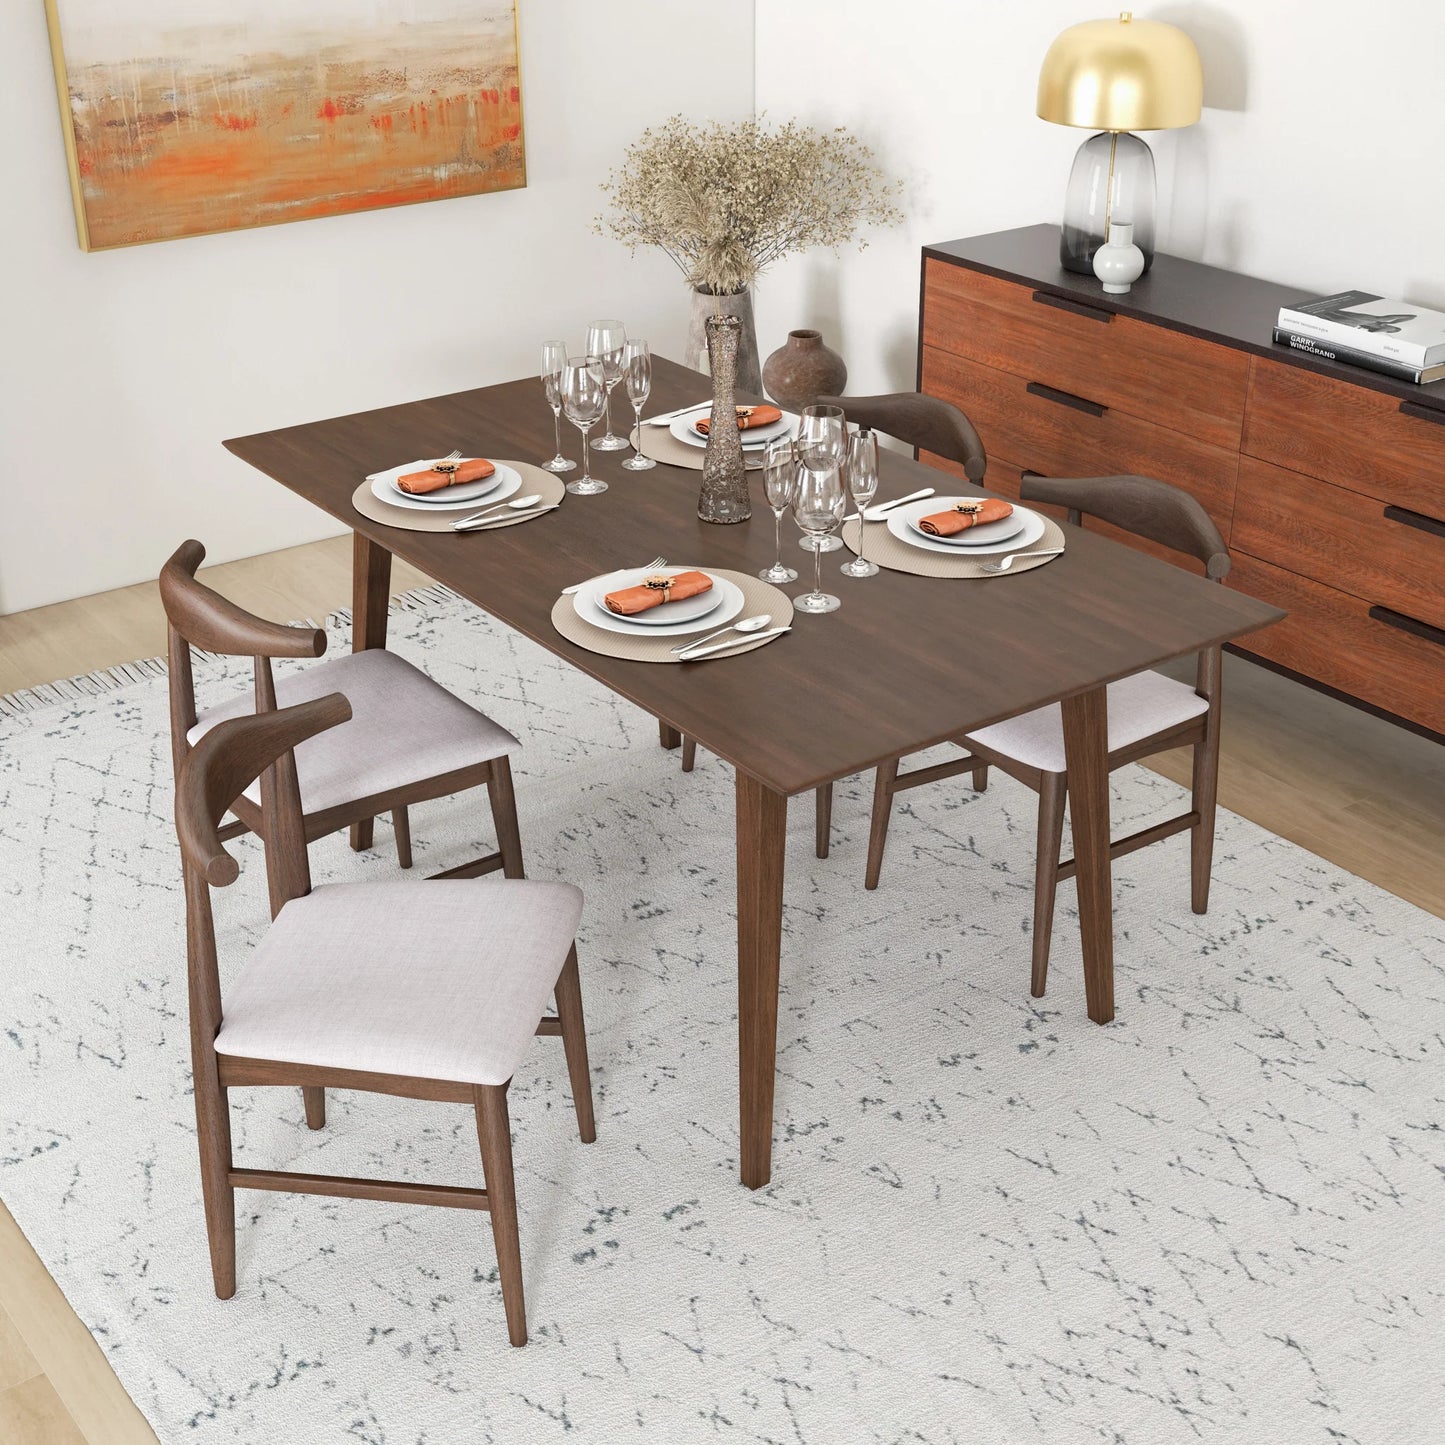 Alpine (Large - Walnut) Dining Set with 4 Winston (Beige) Dining Chairs